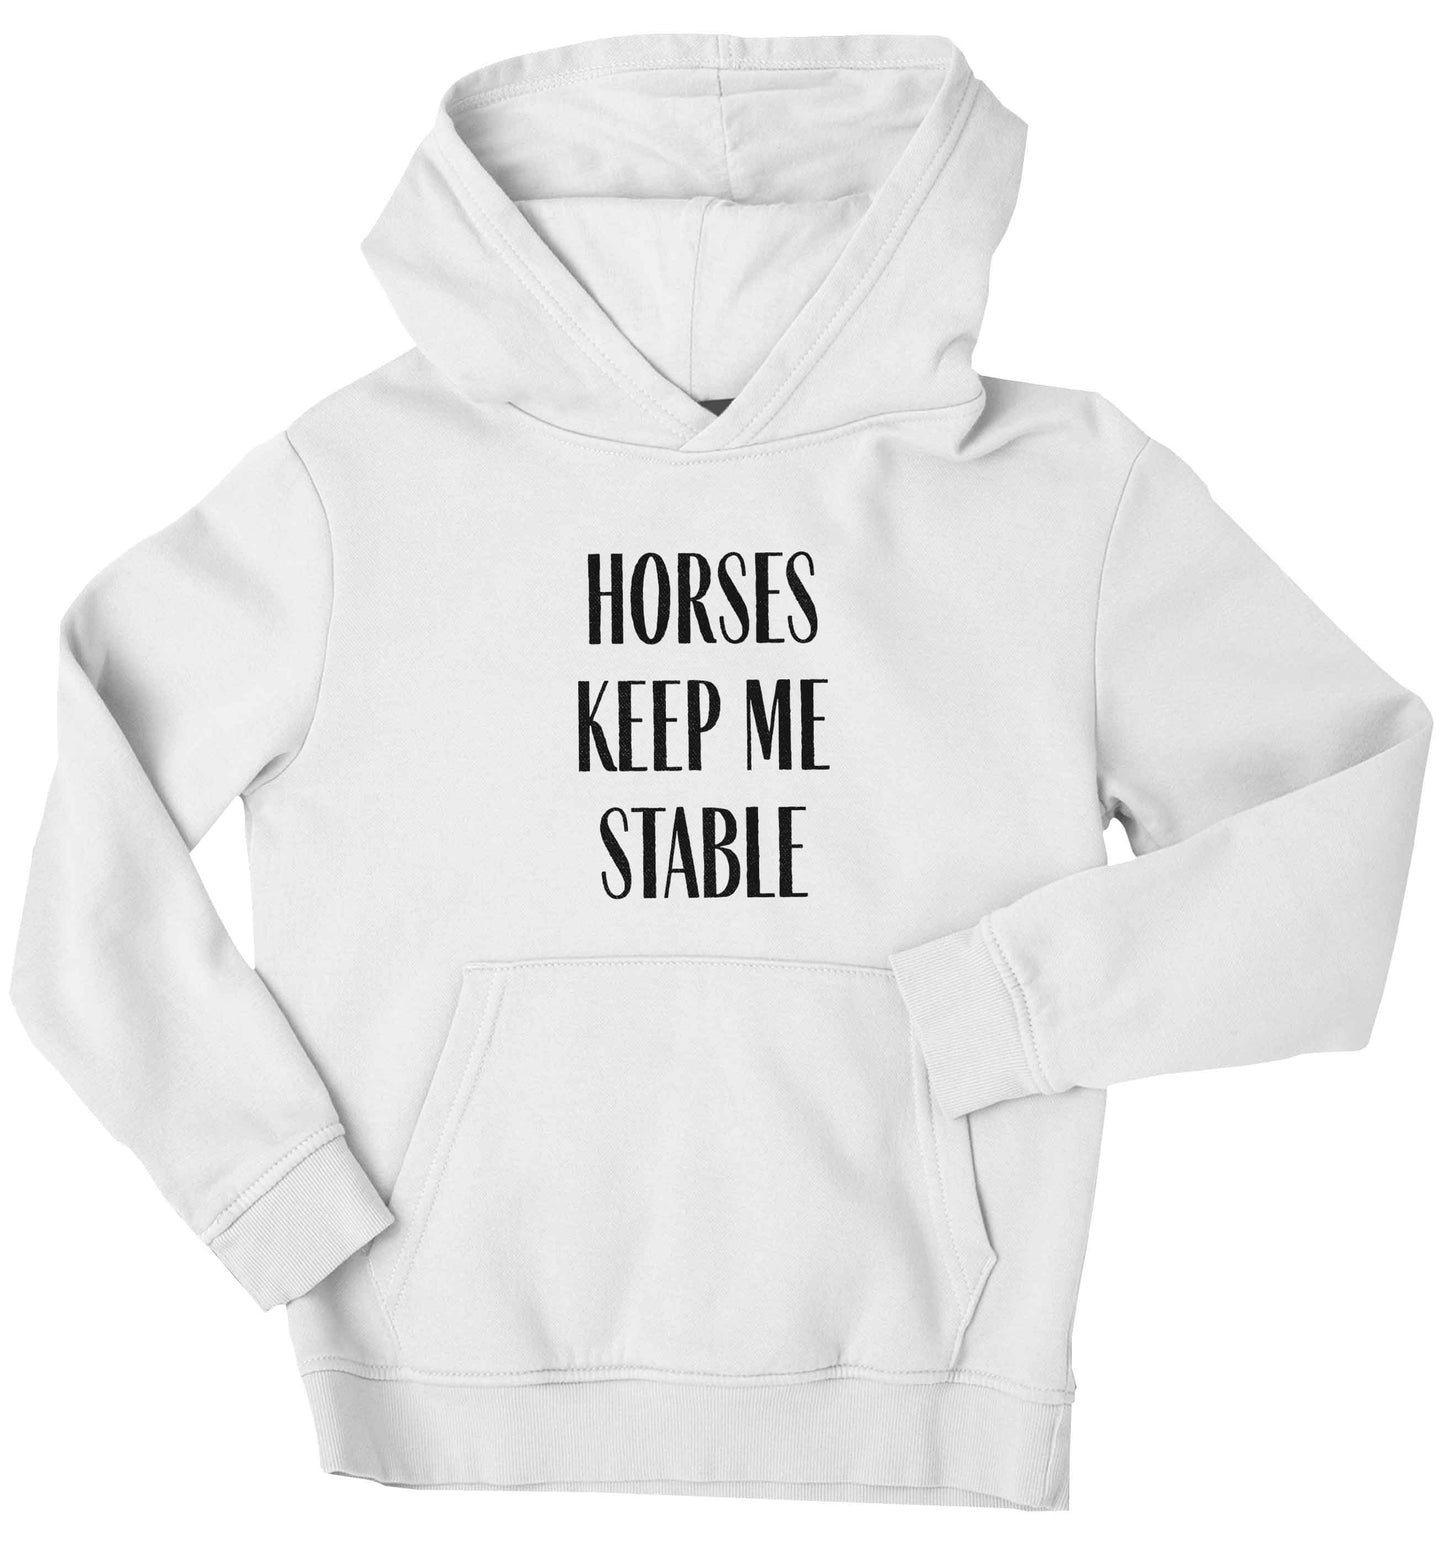 Horses keep me stable children's white hoodie 12-13 Years